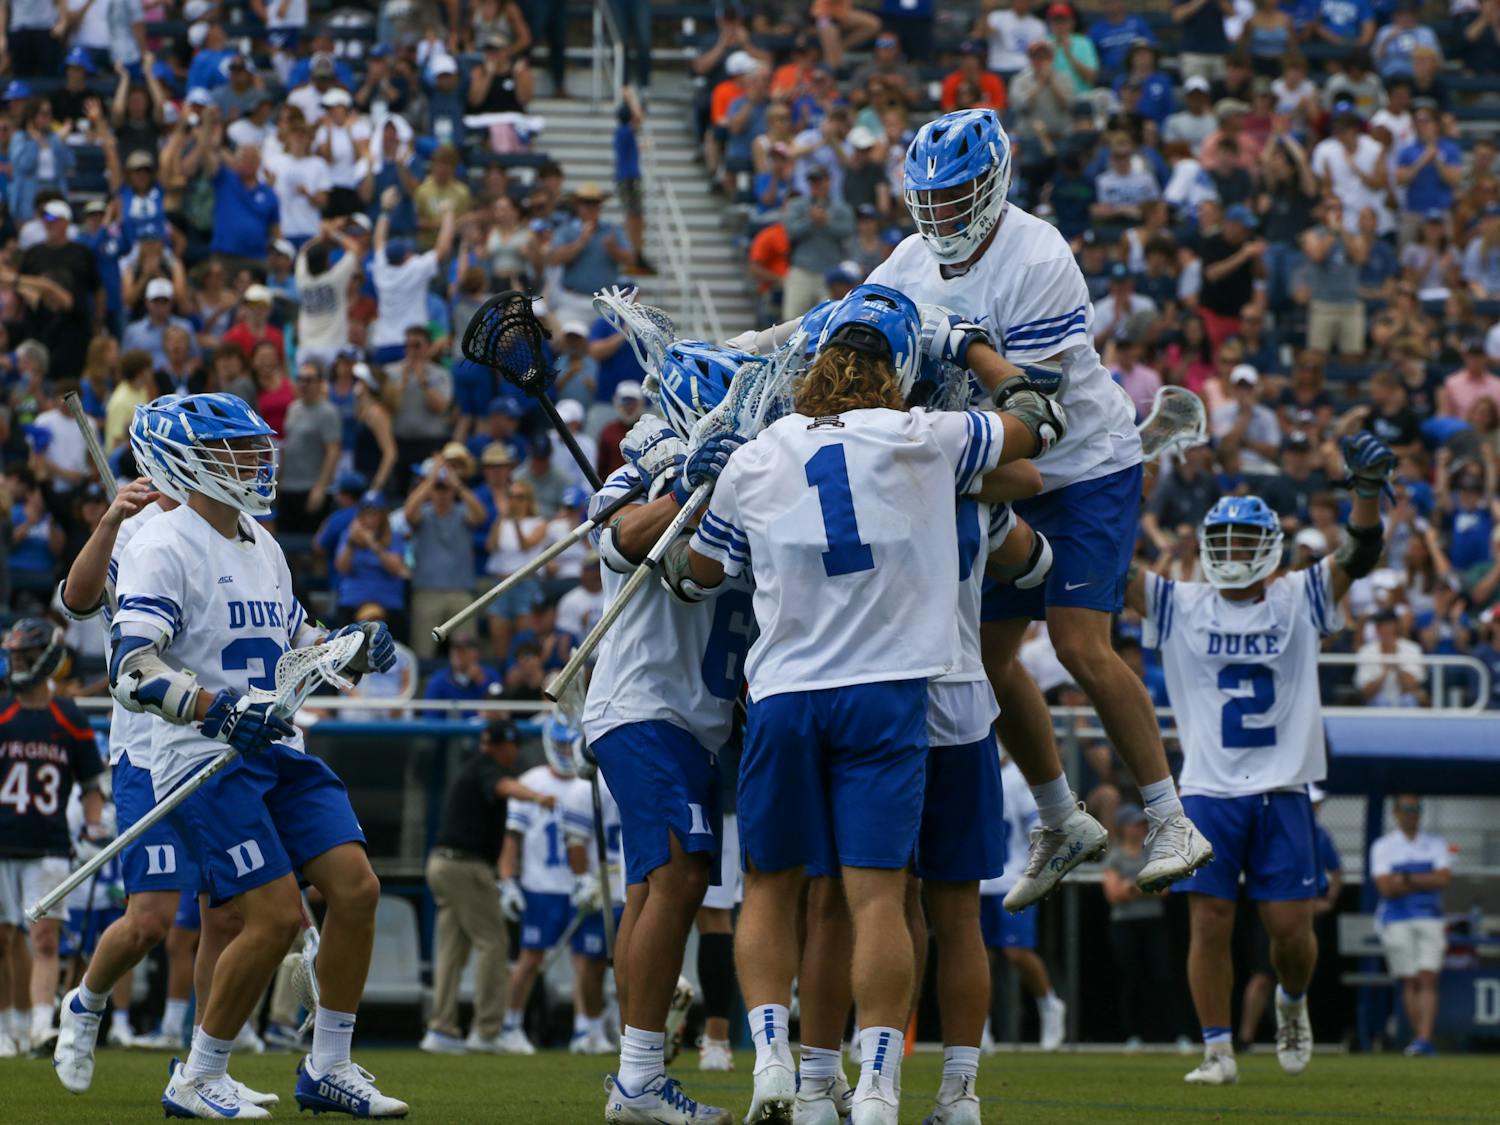 The first-seeded Blue Devils are set to face the winner of Marist and Delaware in the first round of the NCAA tournament.